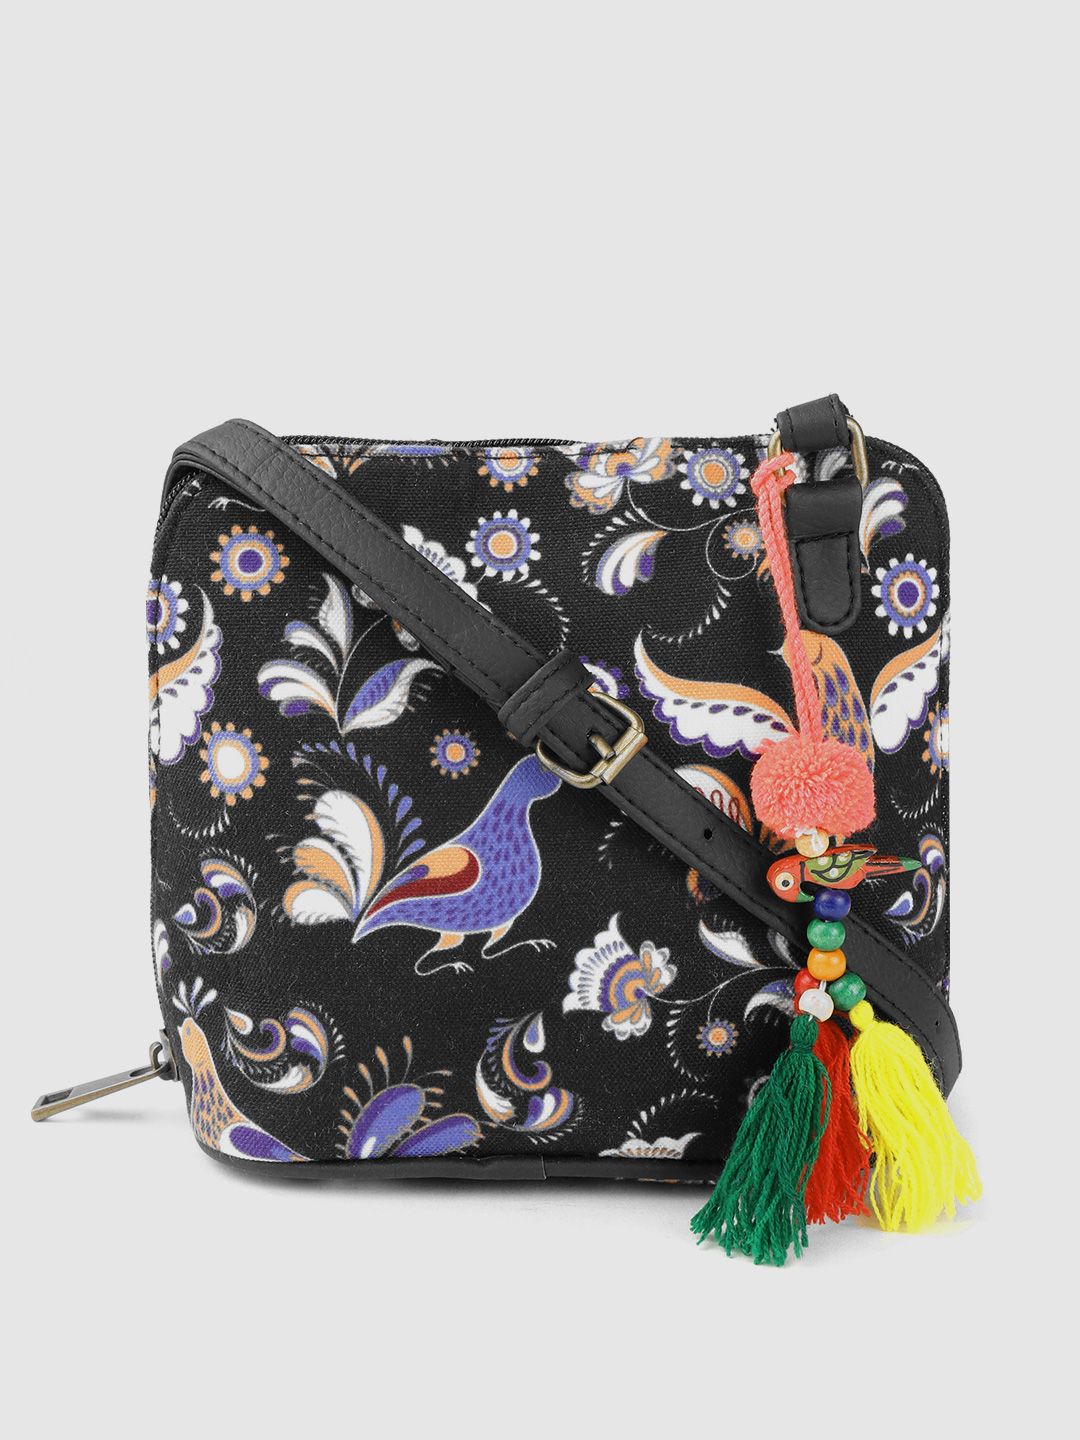 Anouk Black & Blue Ethnic Motifs Print Sling Bag with Tasselled Detail Price in India